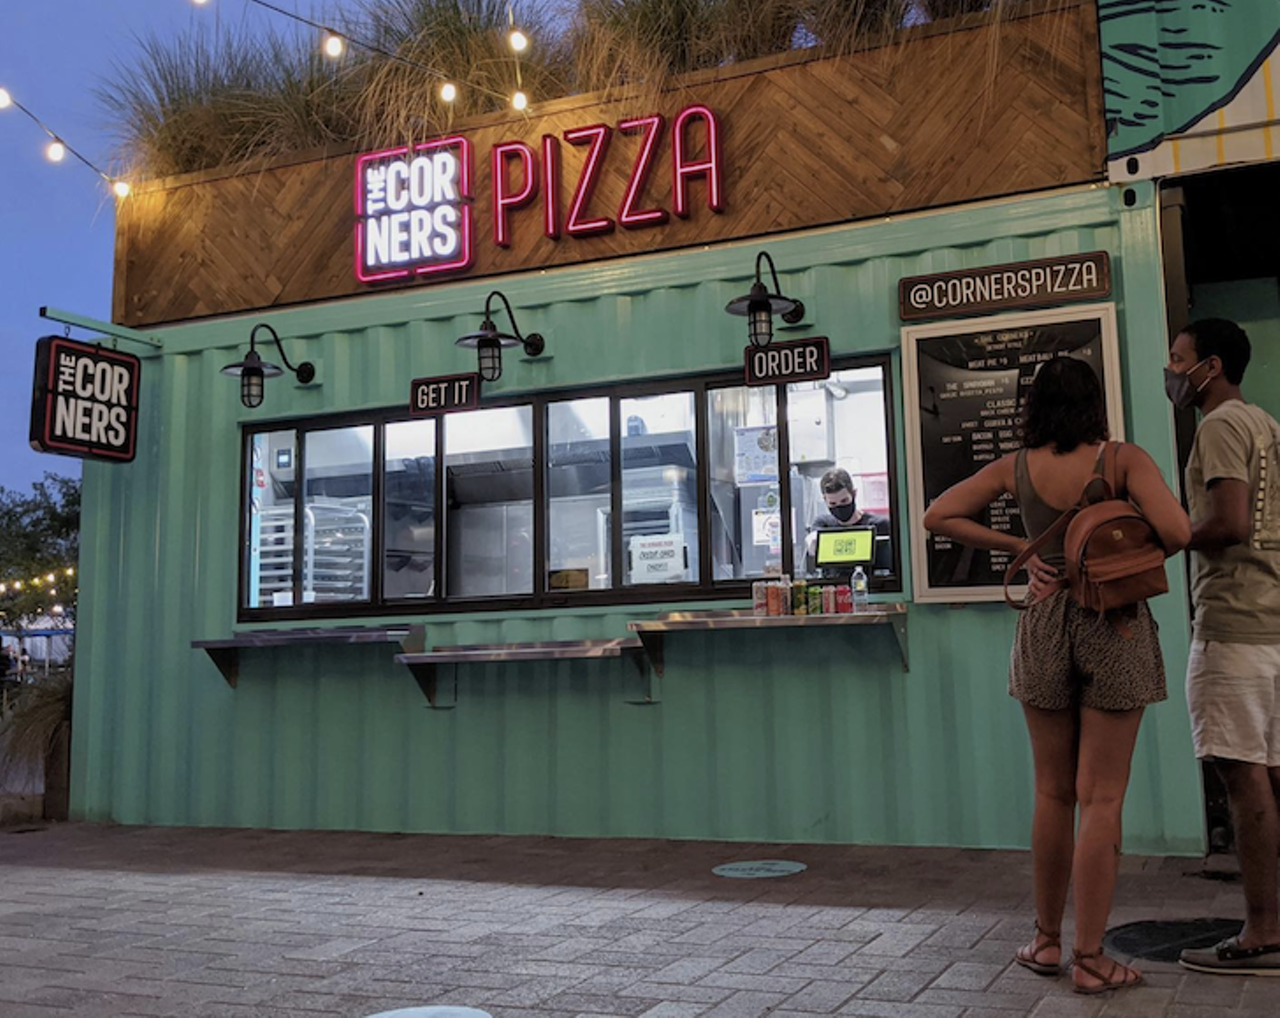 The Corners Pizza
815 Water St., Tampa
The Sparkman Wharf resident, The Corners, is launching a new location at Water Street in downtown Tampa. The 2,500 square-foot, 120-seat restaurant will include both a full bar and an extensive patio area.